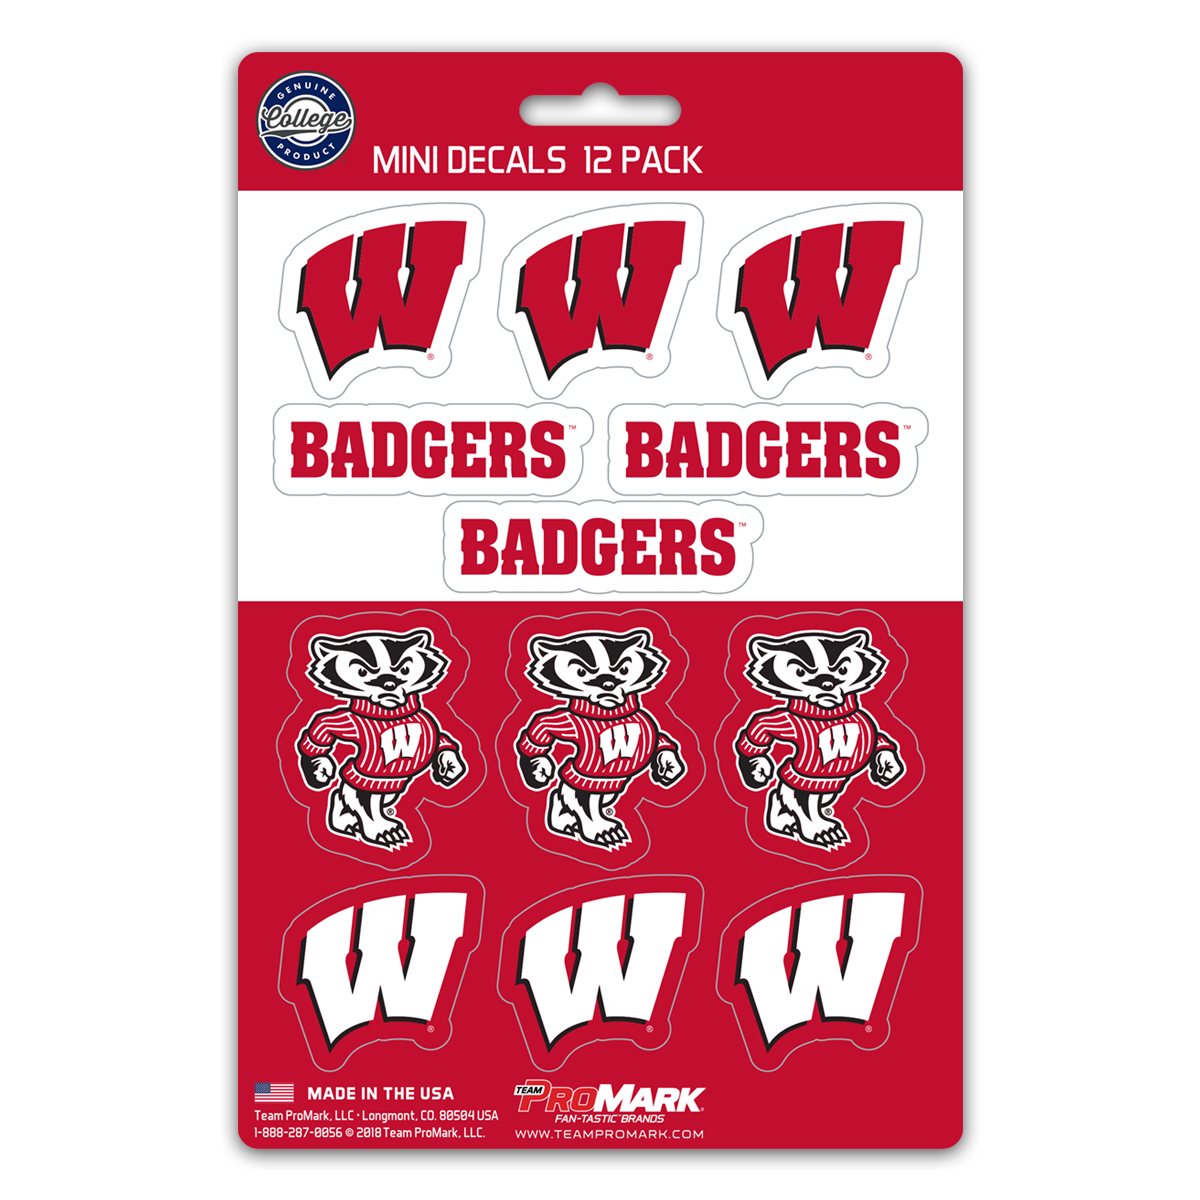 Wisconsin Badgers Decal Set Mini 12 Pack - Special Order